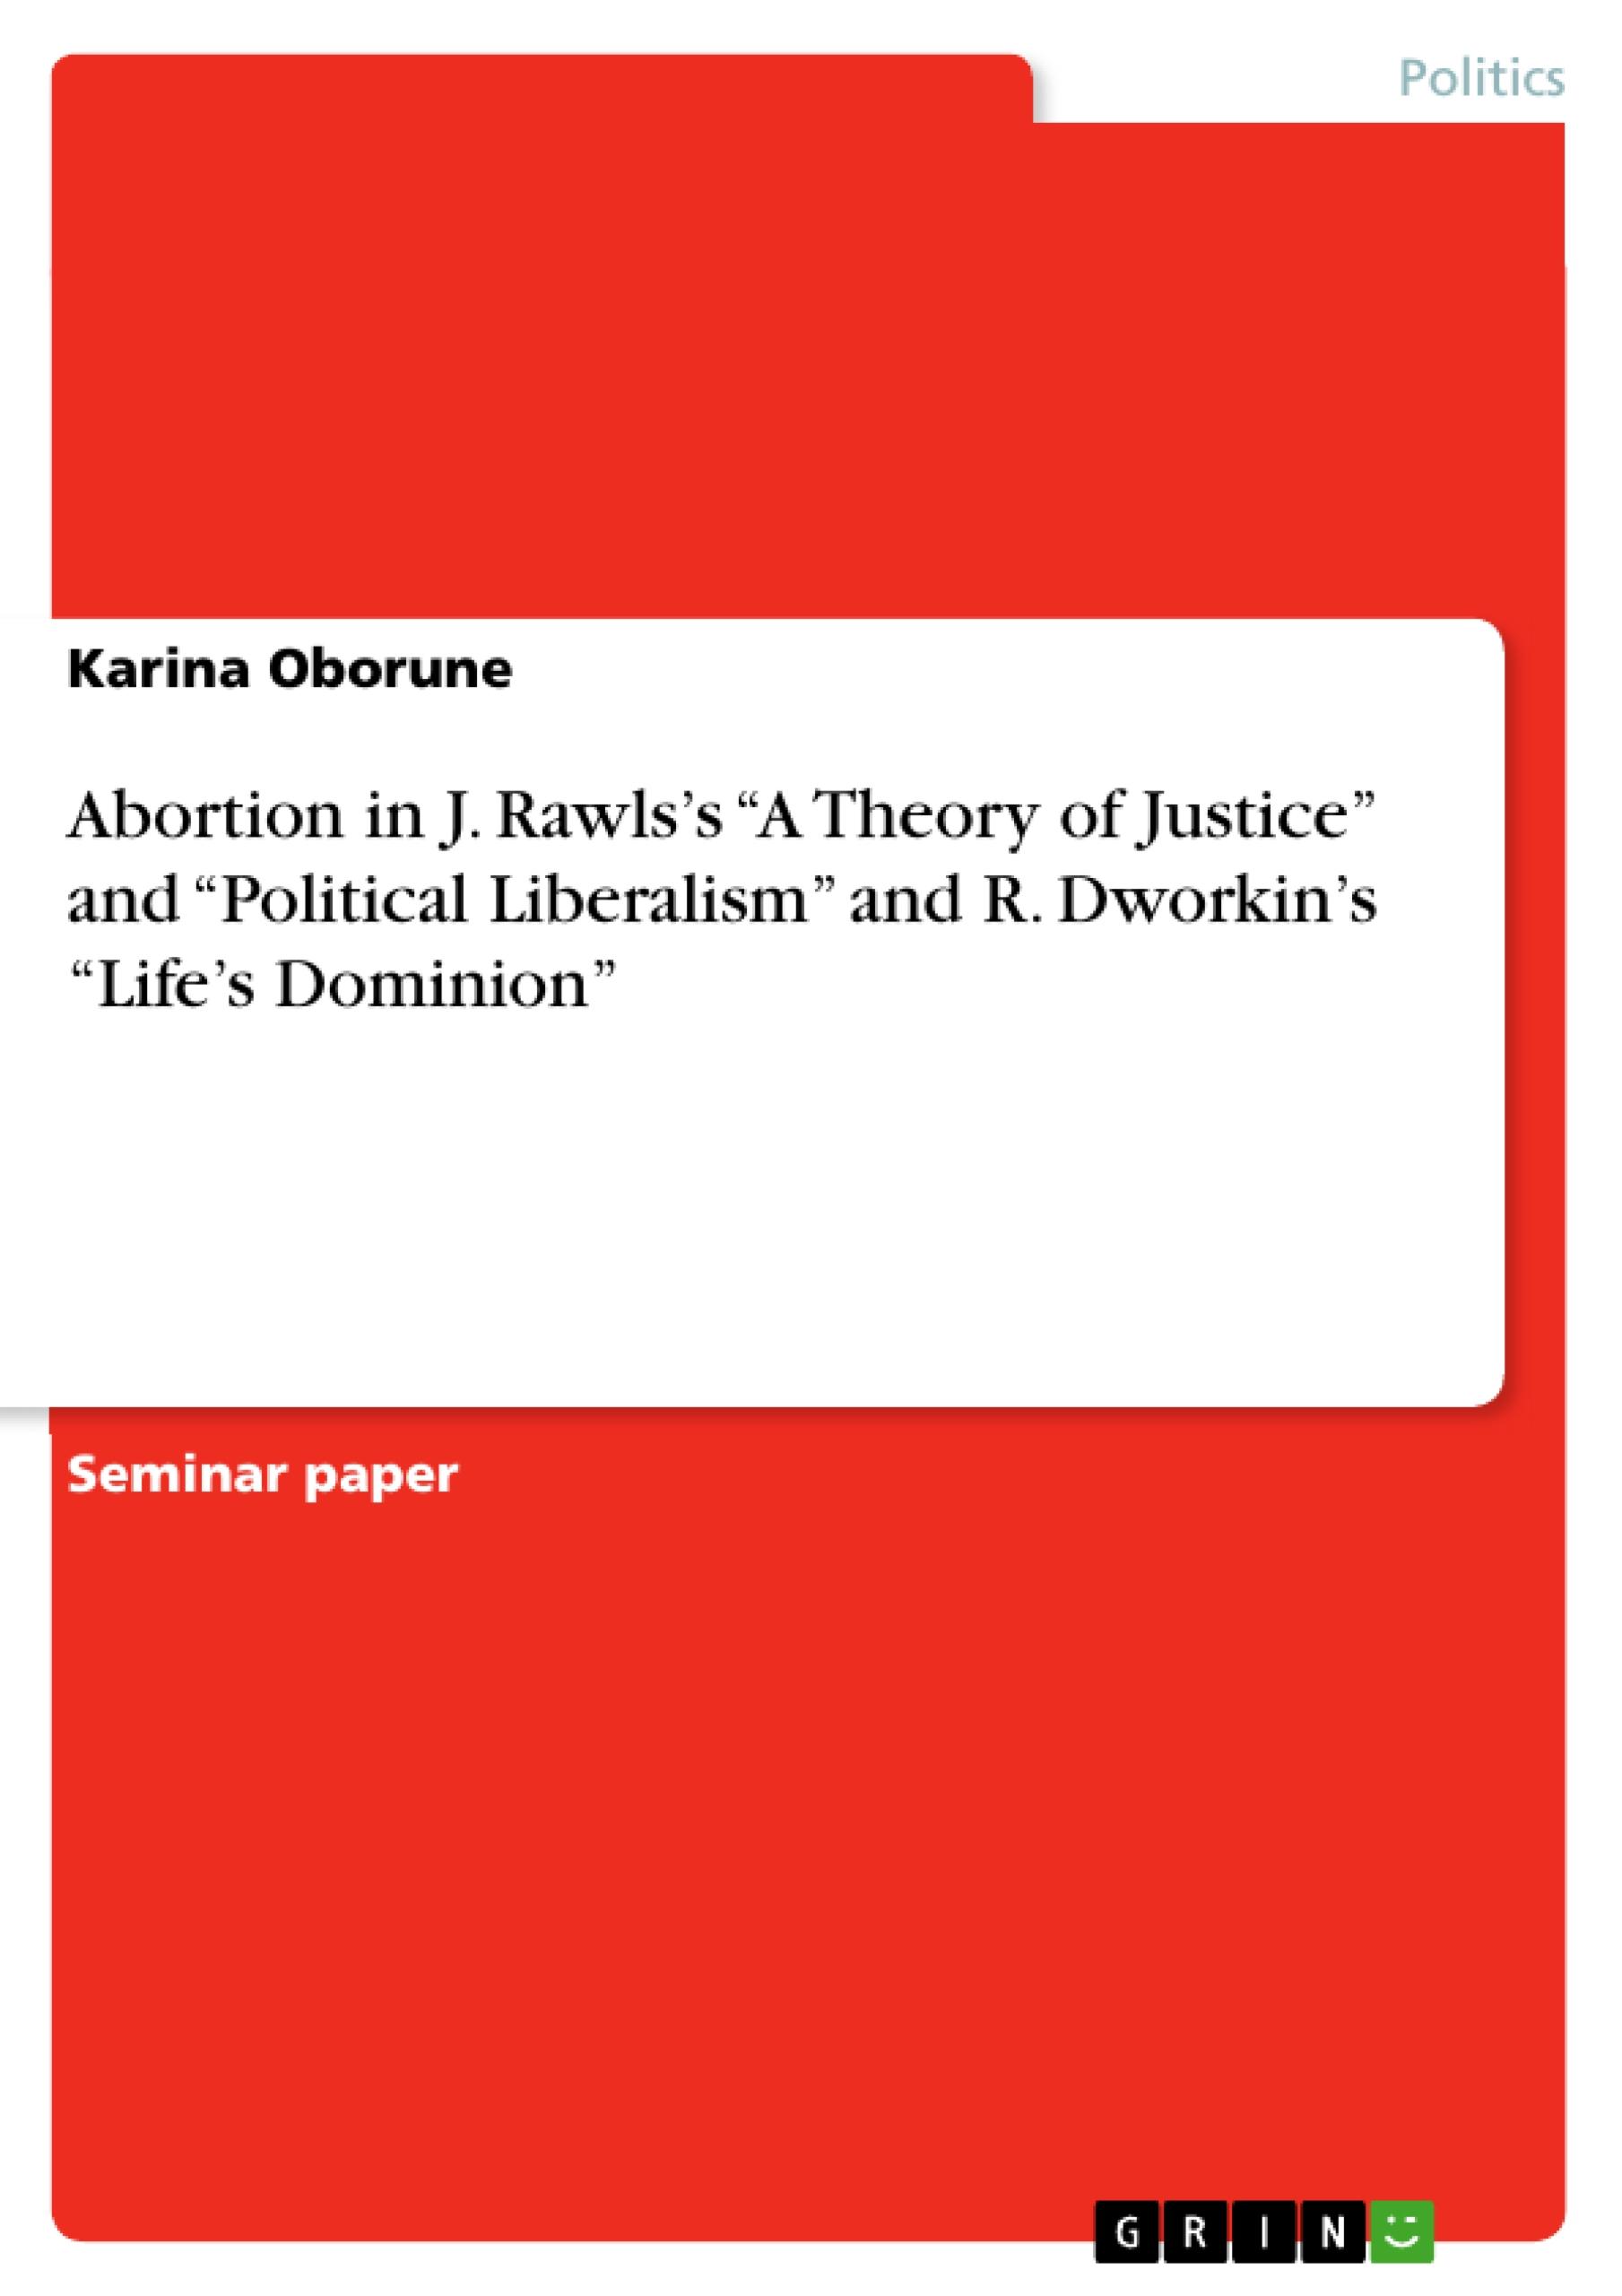 Abortion in J. Rawls s  A Theory of Justice  and  Political Liberalism  and R. Dworkin s  Life s Dominion - Oborune, Karina